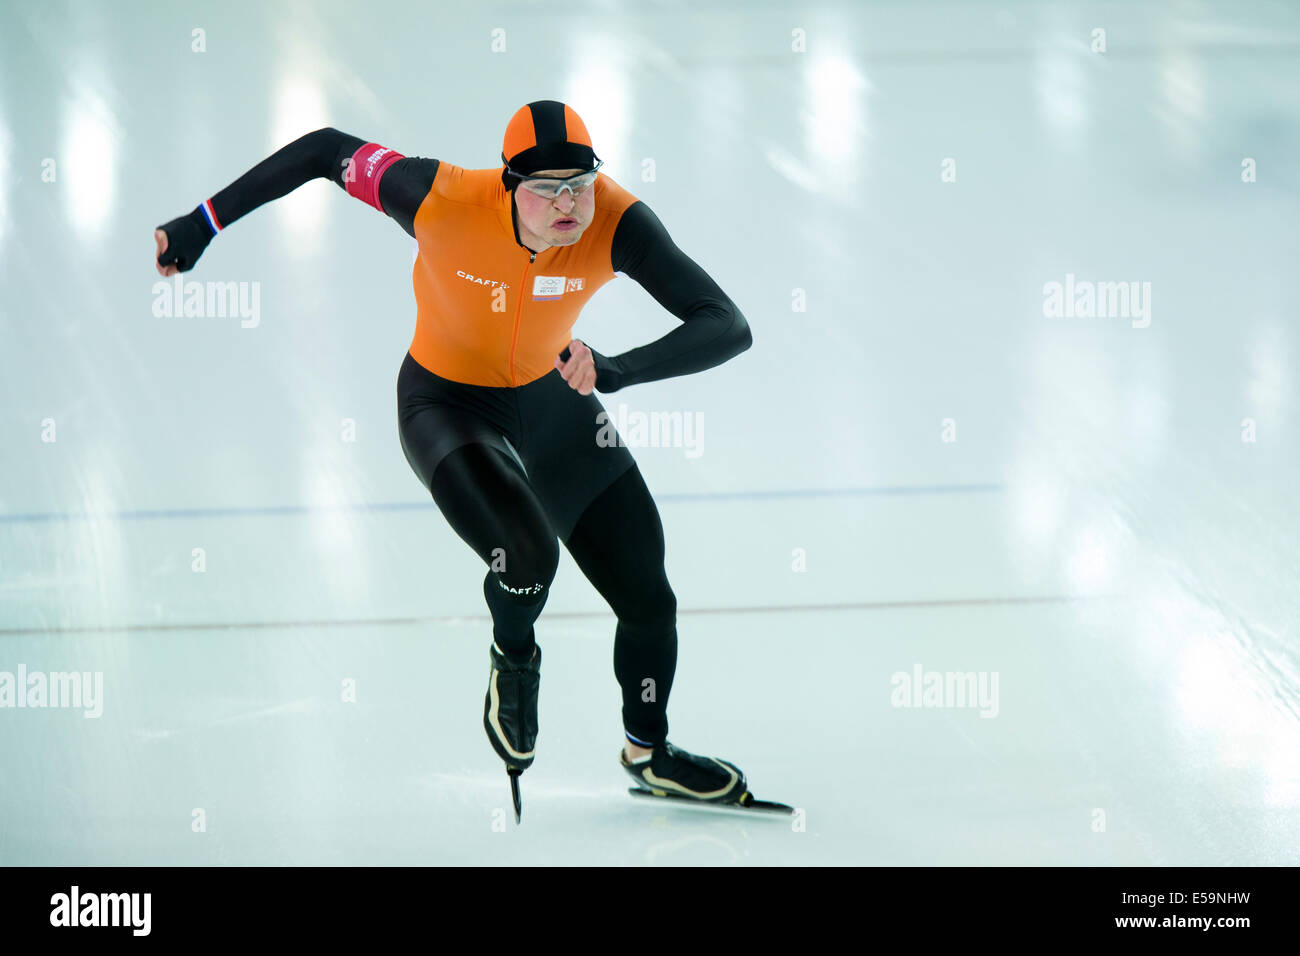 Sven Kramer (NED) gold medalist competing in Men's 5000m Speed Skating at the Olympic Winter Games, Sochi 2014 Stock Photo